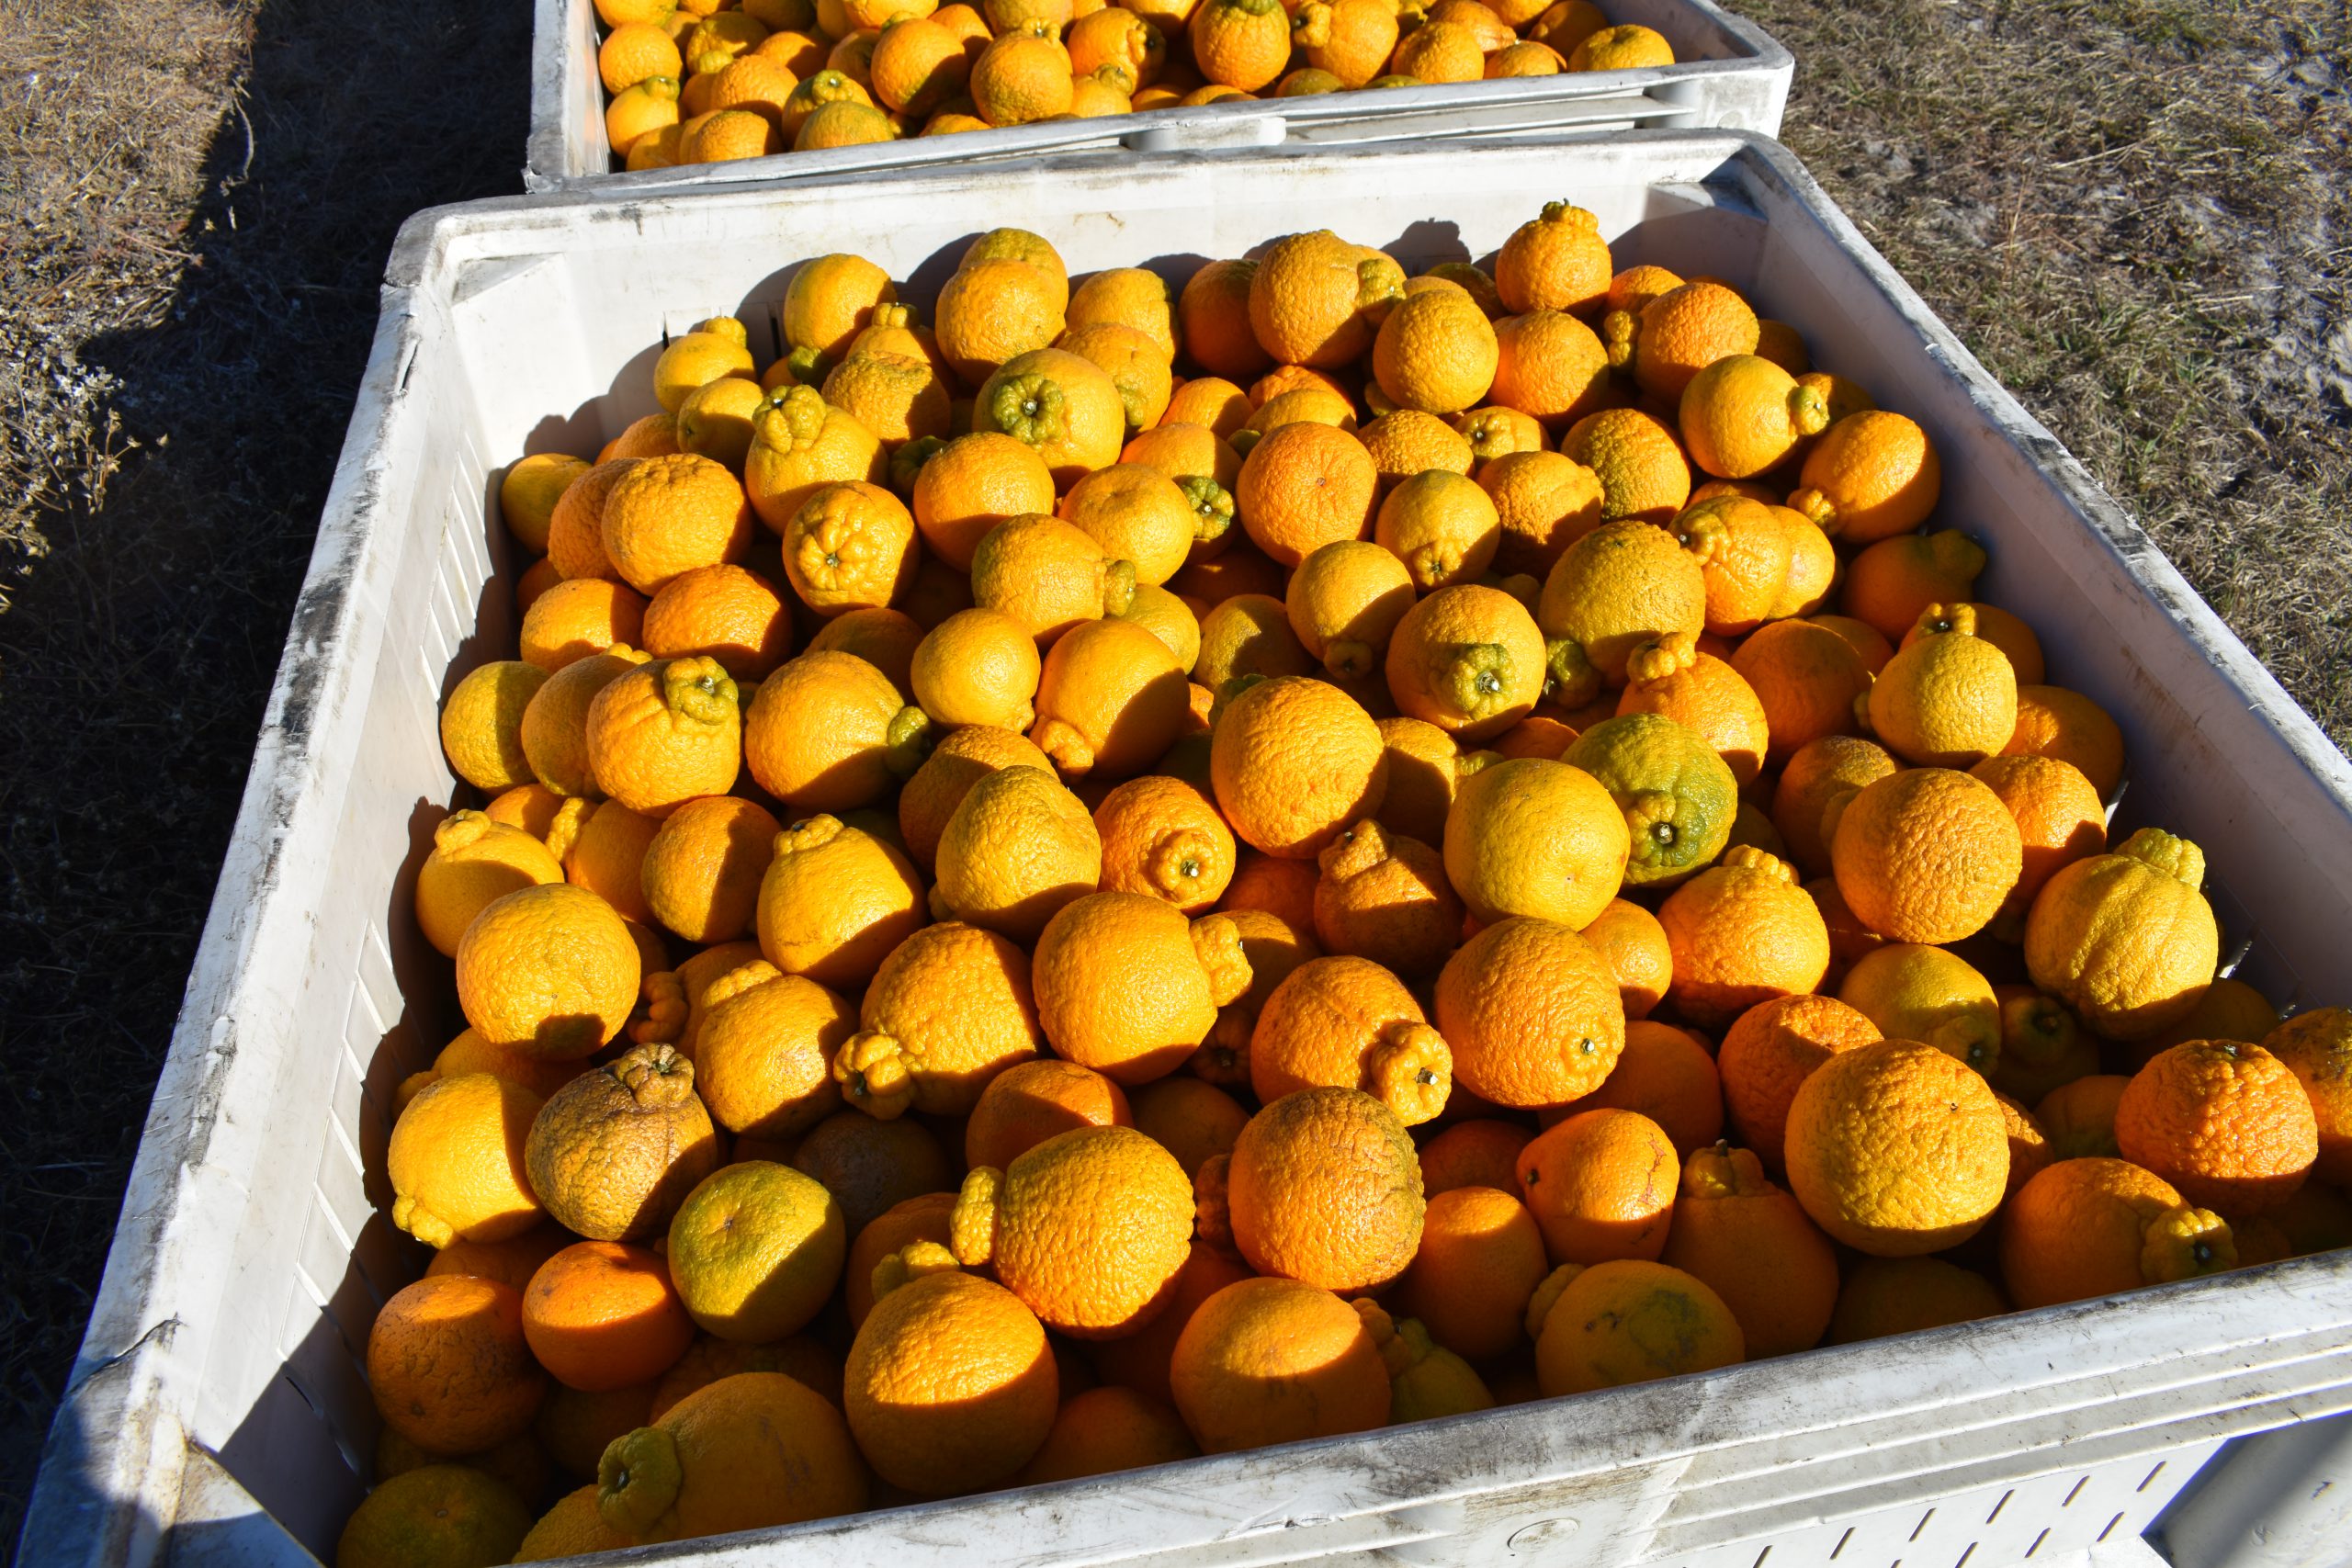 Here's Where To Buy The Sumo Citrus Oranges People Cannot Stop